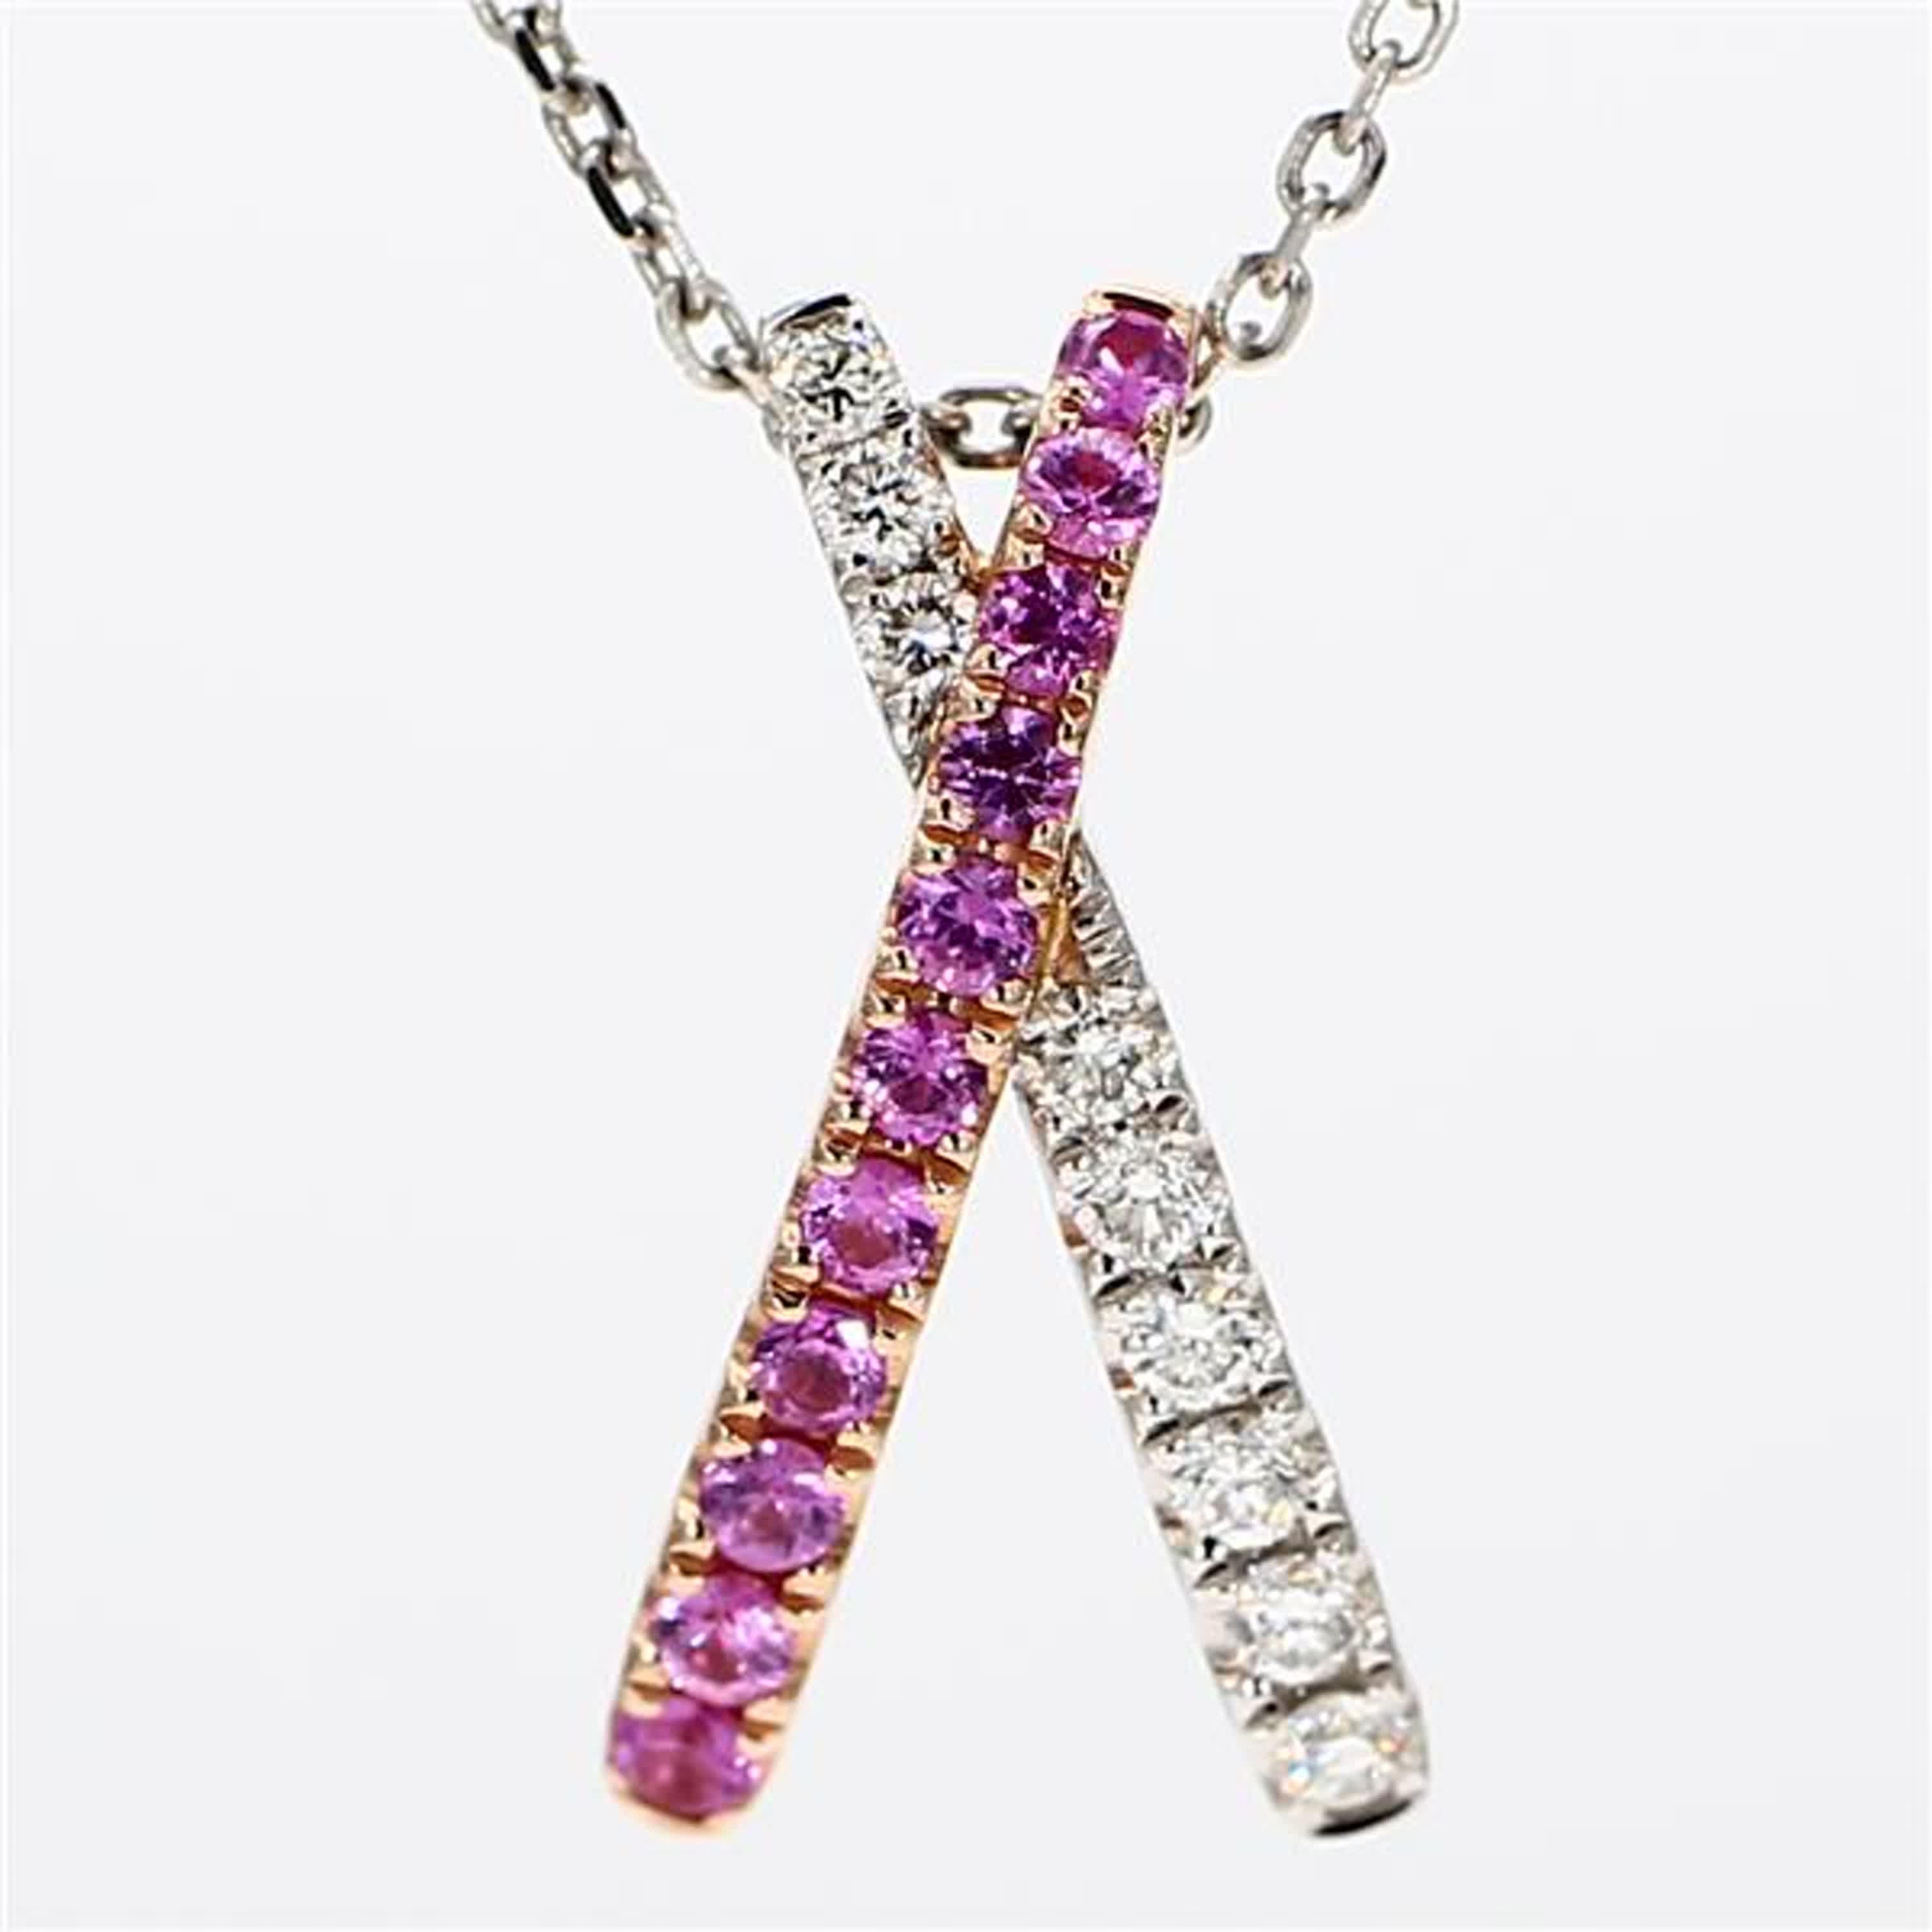 RareGemWorld's classic sapphire pendant. Mounted in a beautiful 14K Rose and White Gold setting with a natural round cut pink sapphires complimented by natural round cut white diamond melee. This pendant is guaranteed to impress and enhance your